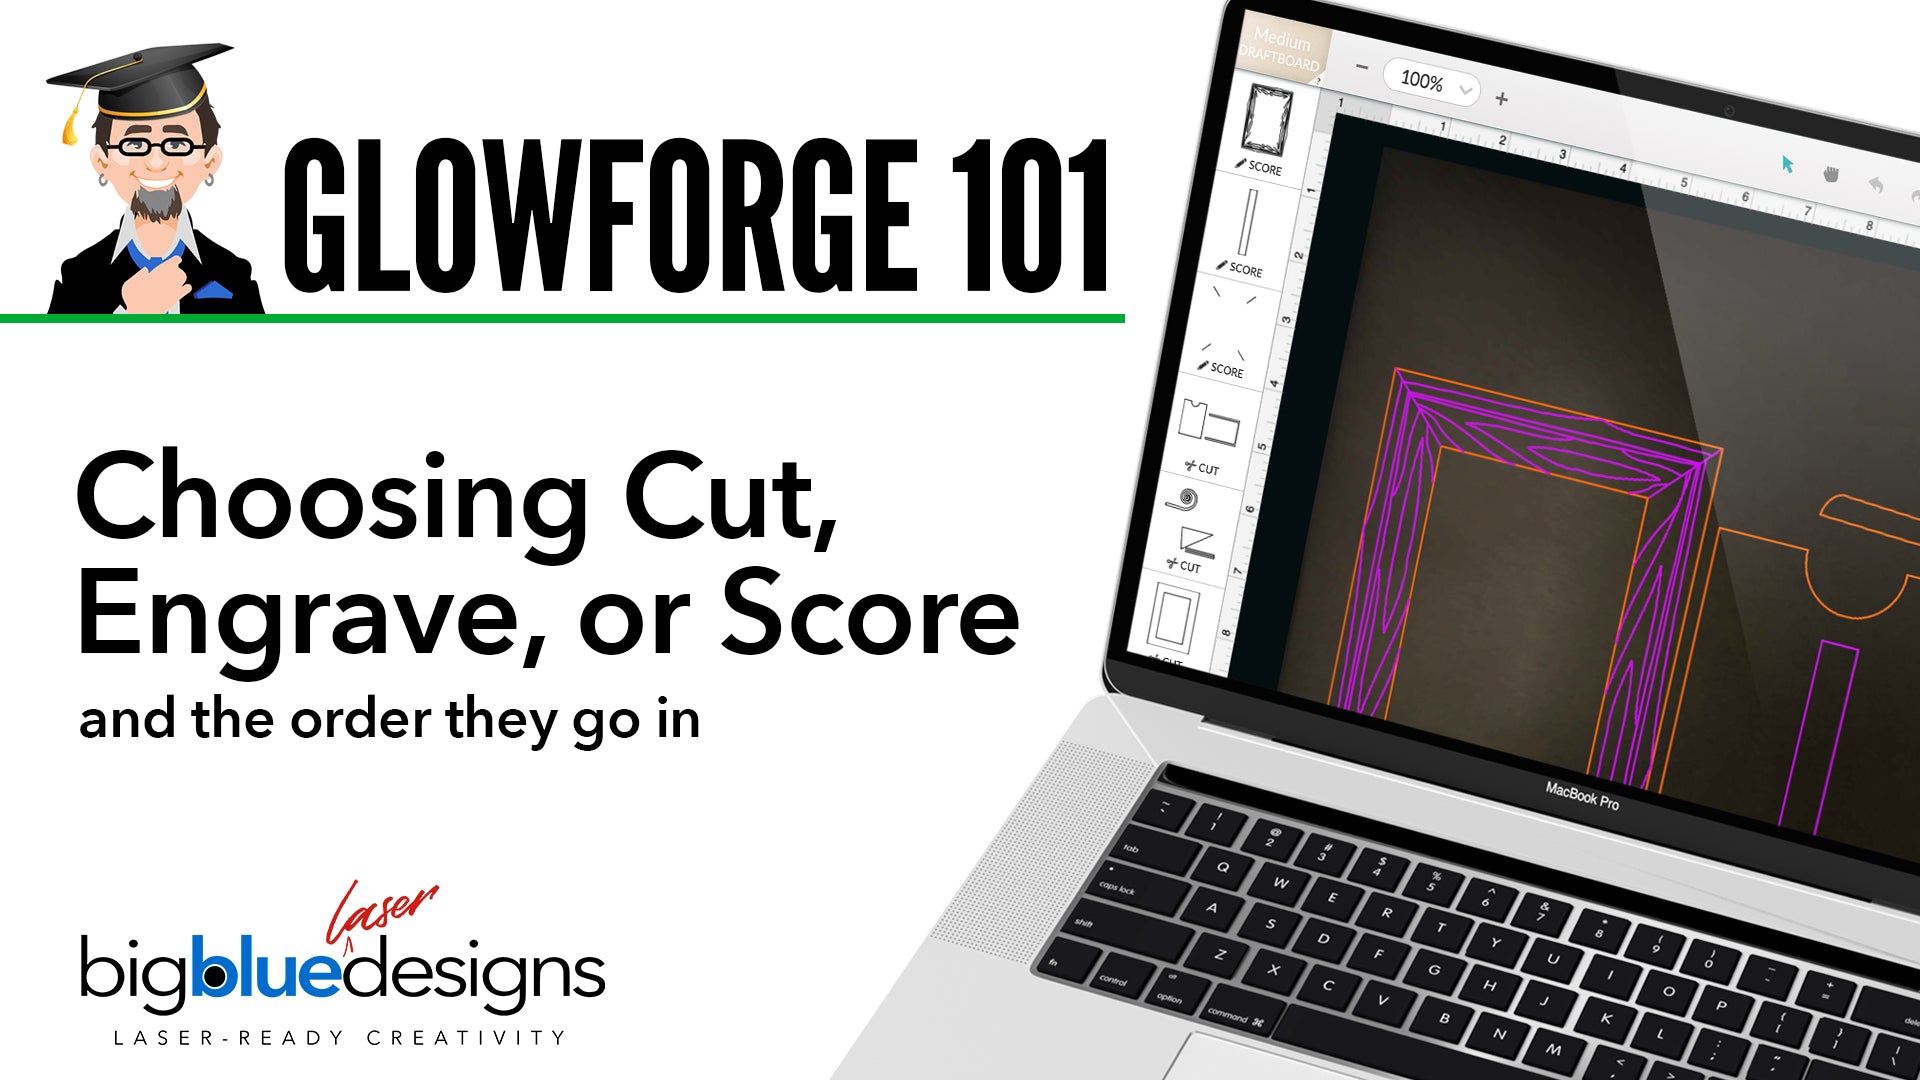 Glowforge 101: Choosing Cut, Score, or Engrave and the Order They Go In